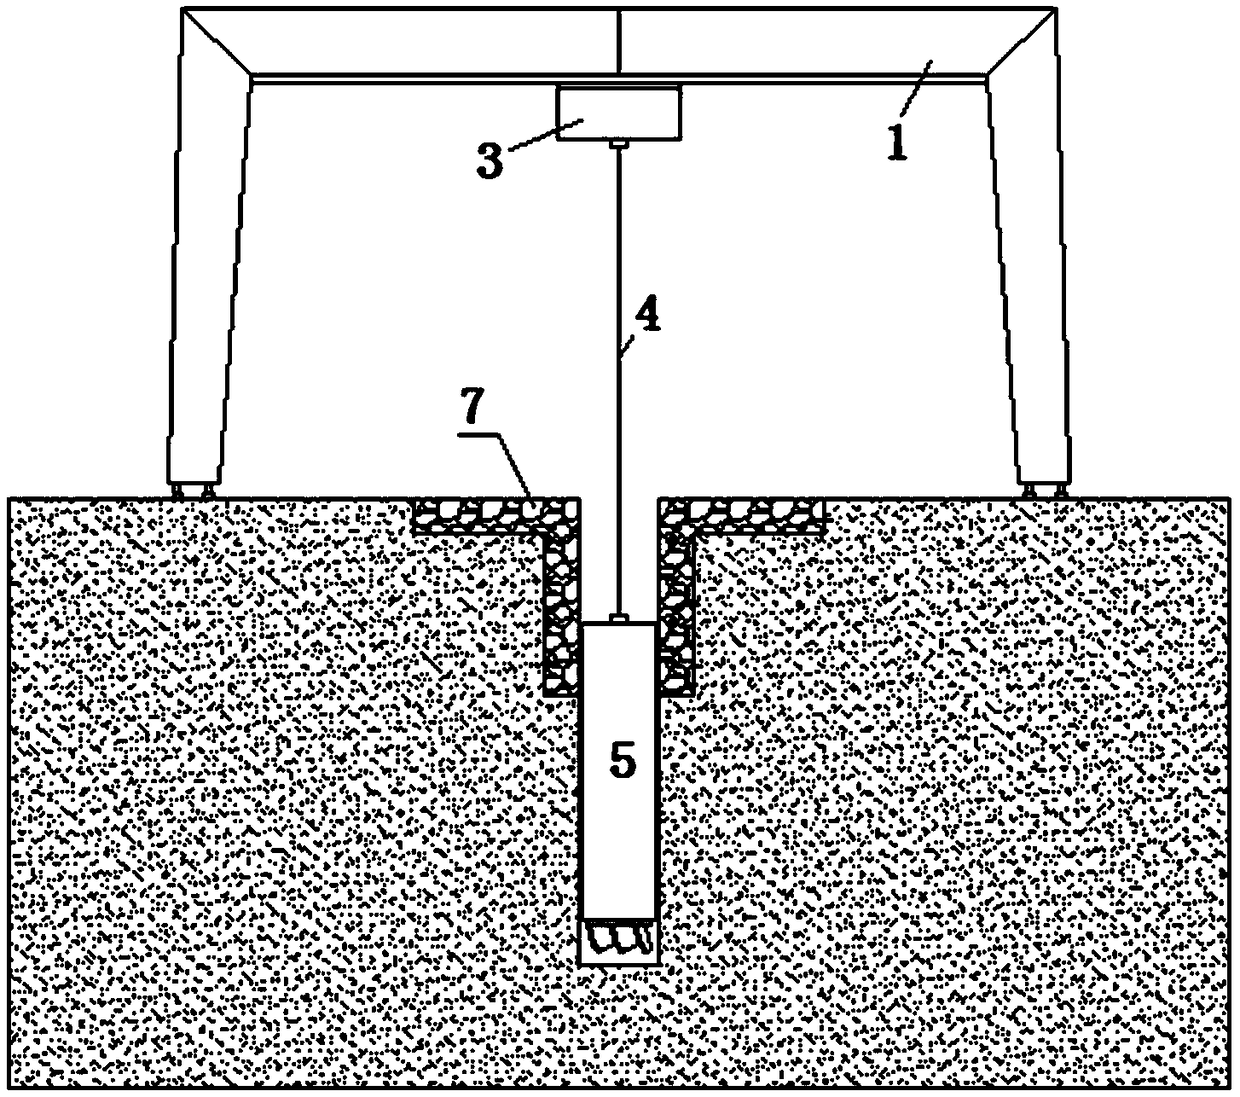 Method for constructing underground continuous wall by using cutter-suction head